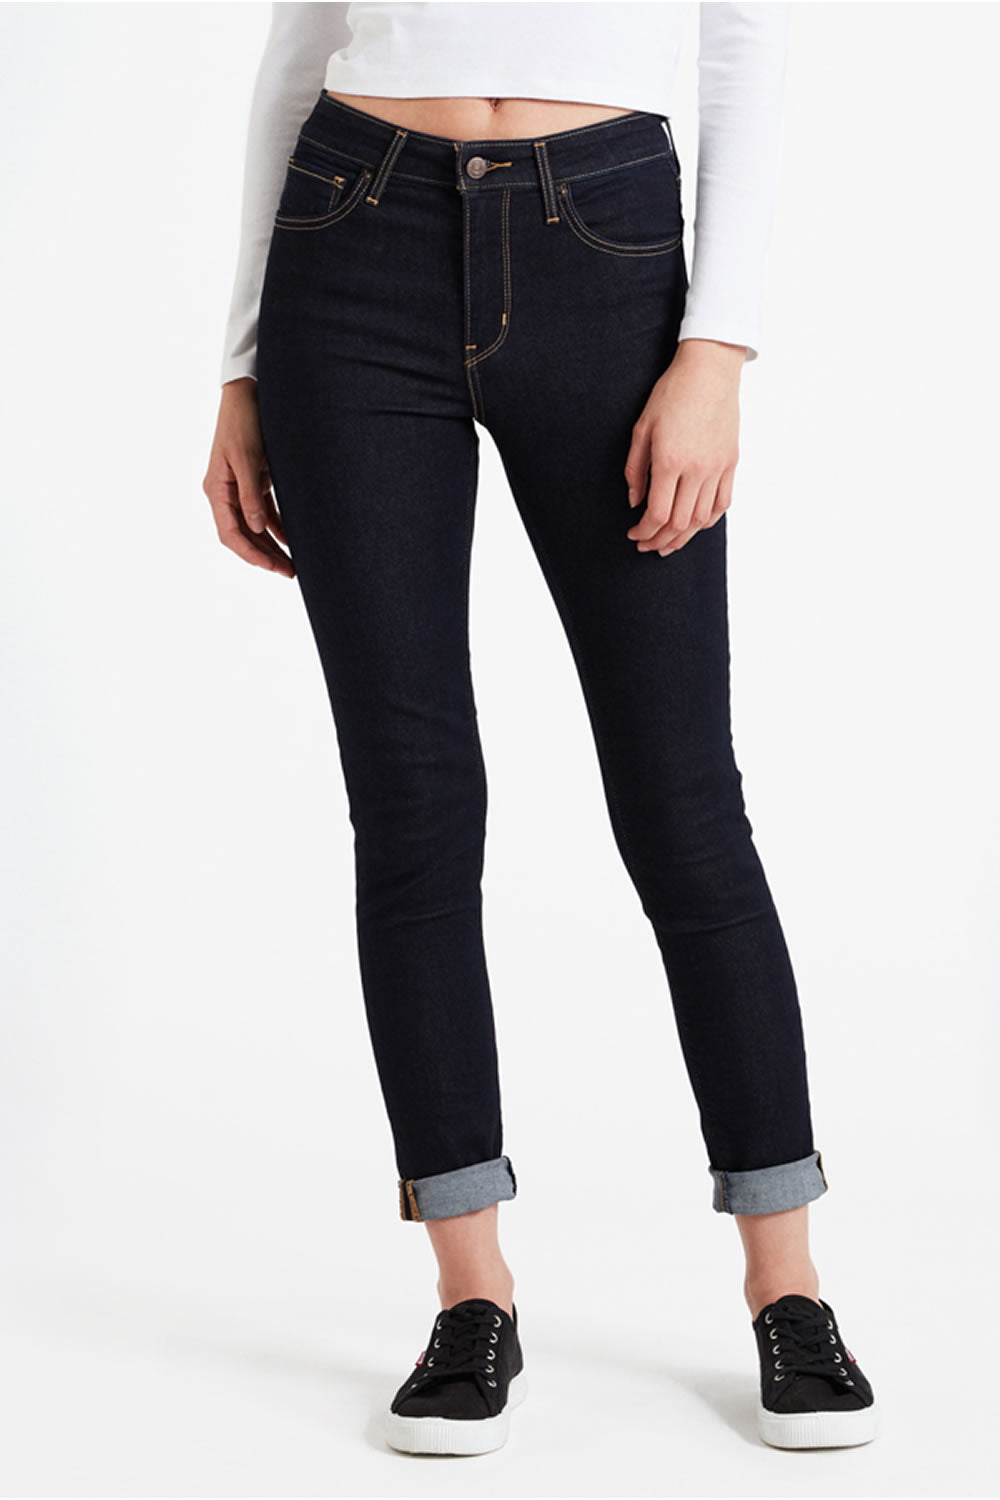 Levi 721 High Rise Skinny Jeans - Titley's Department Store